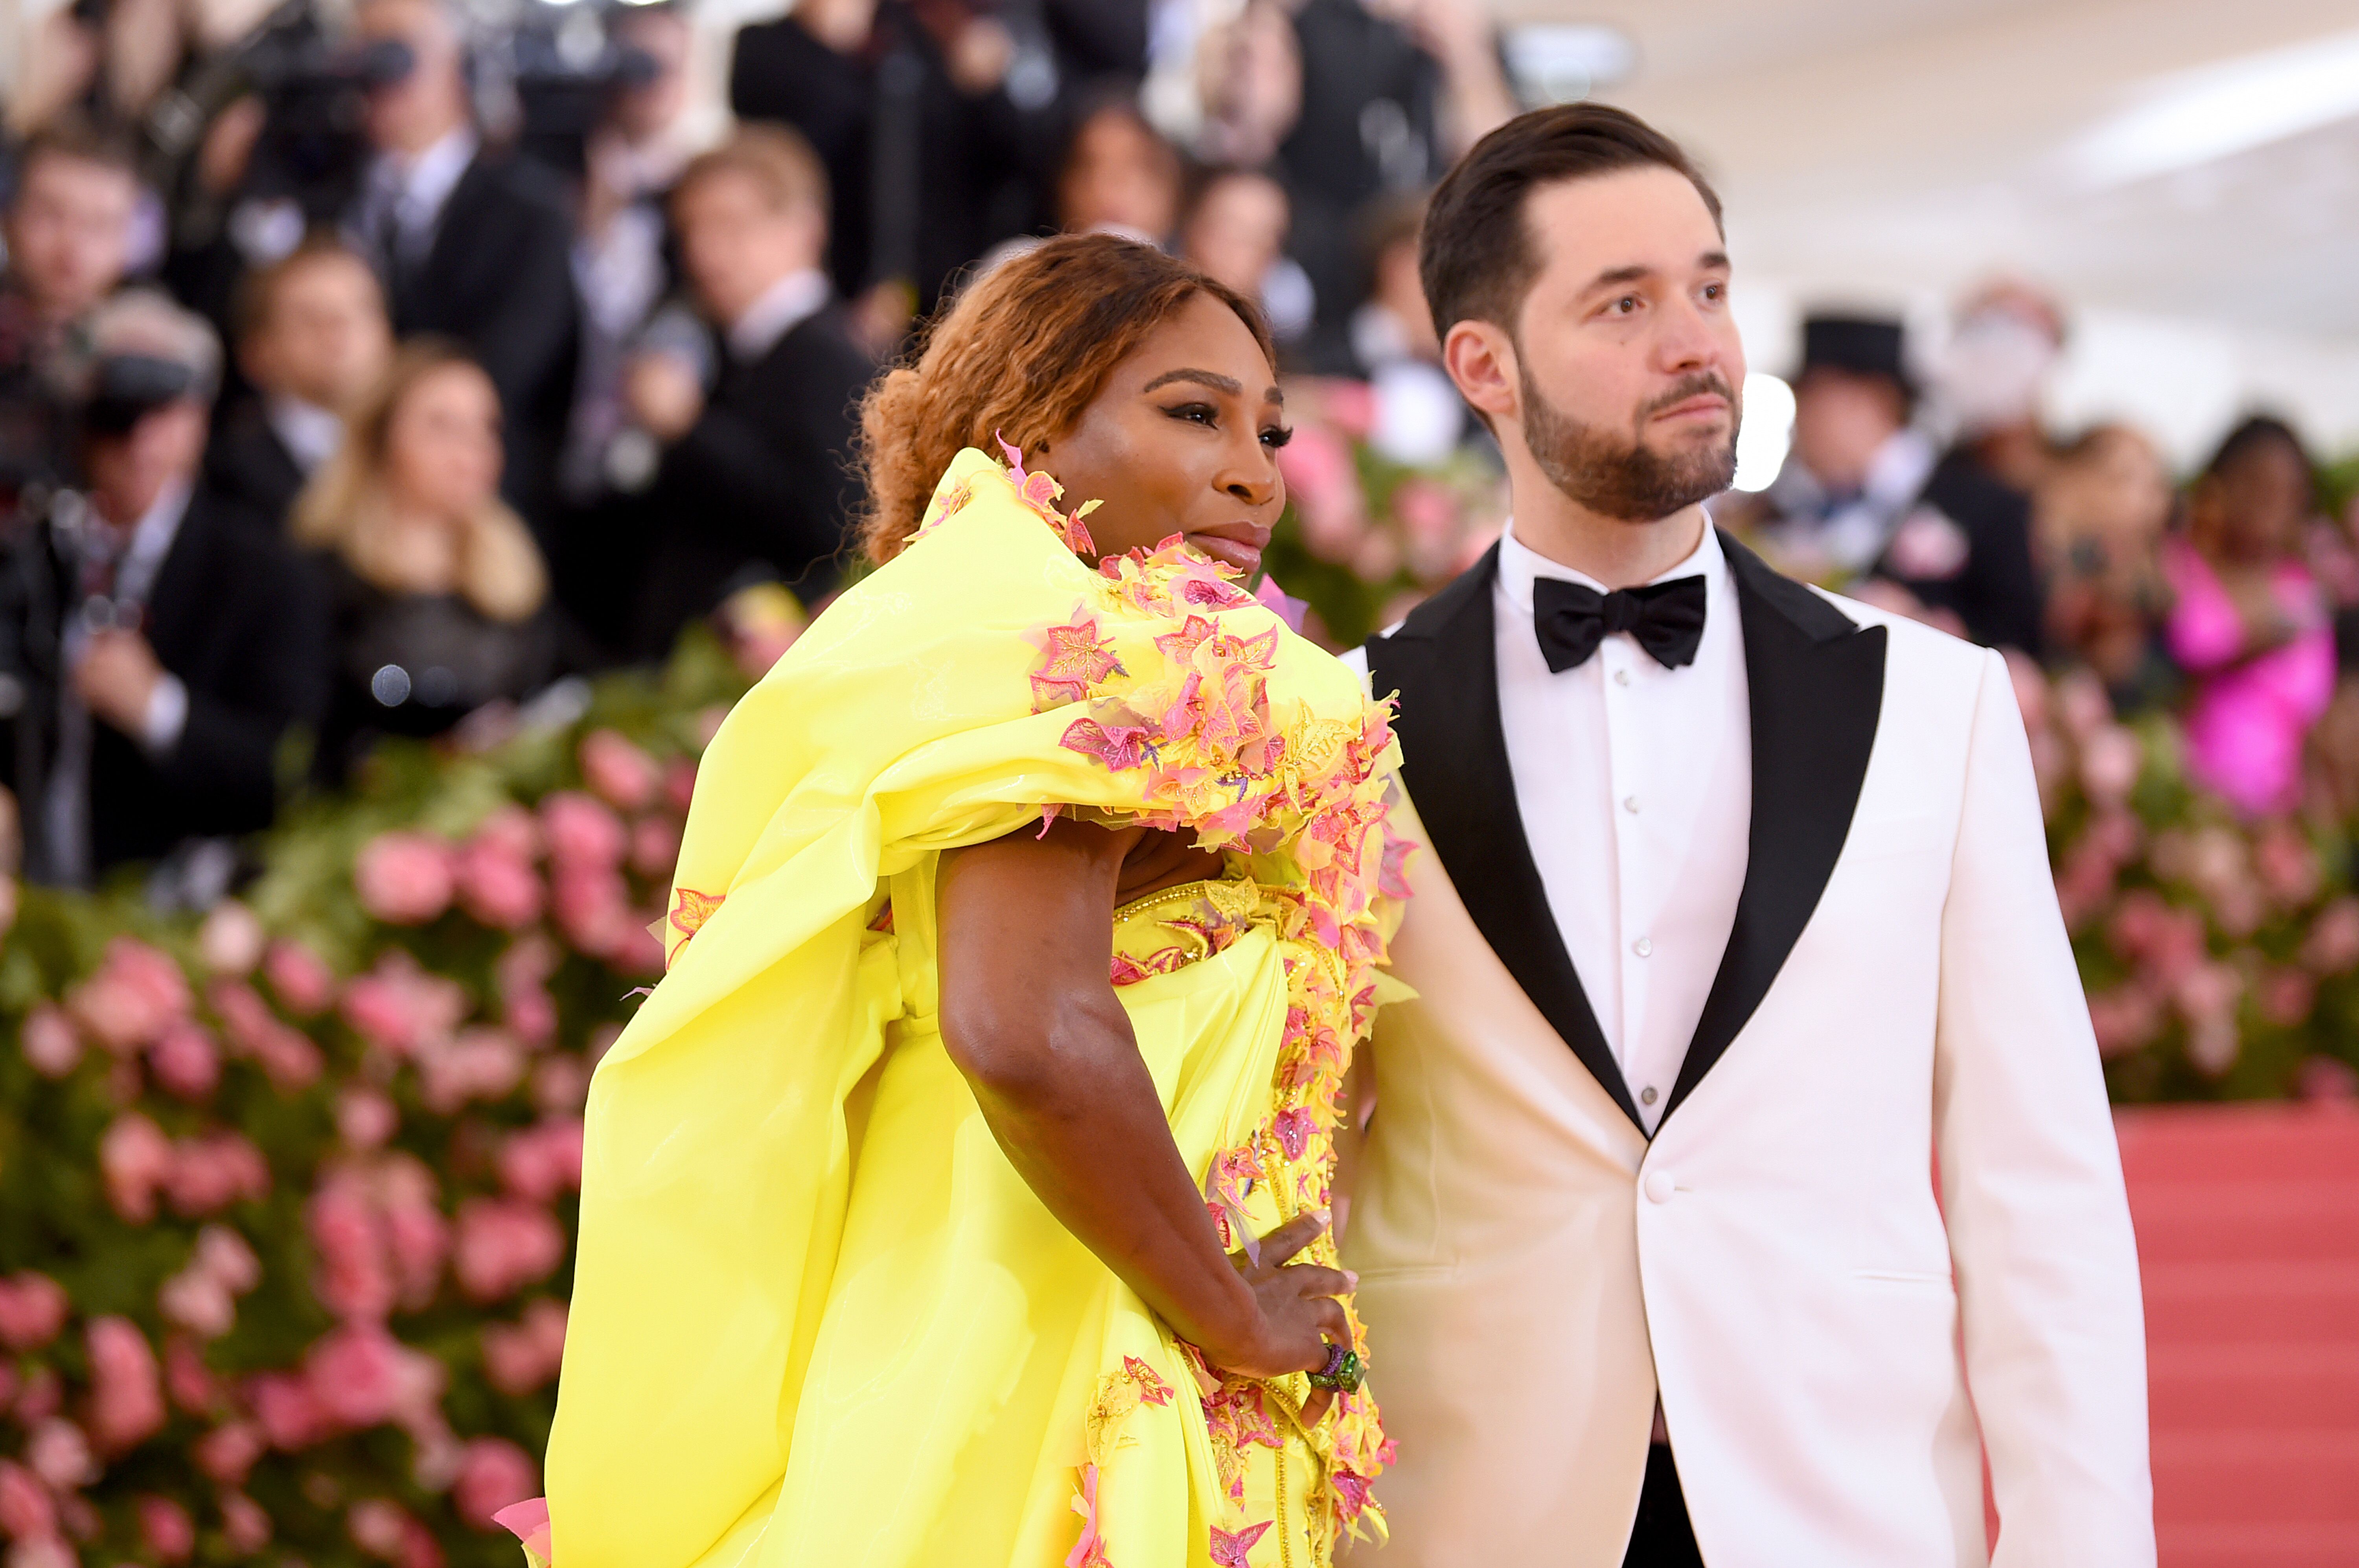 Serena WIlliams and husband Alexis Ohanian at the 2019 MET Gala/ Source: Getty Images